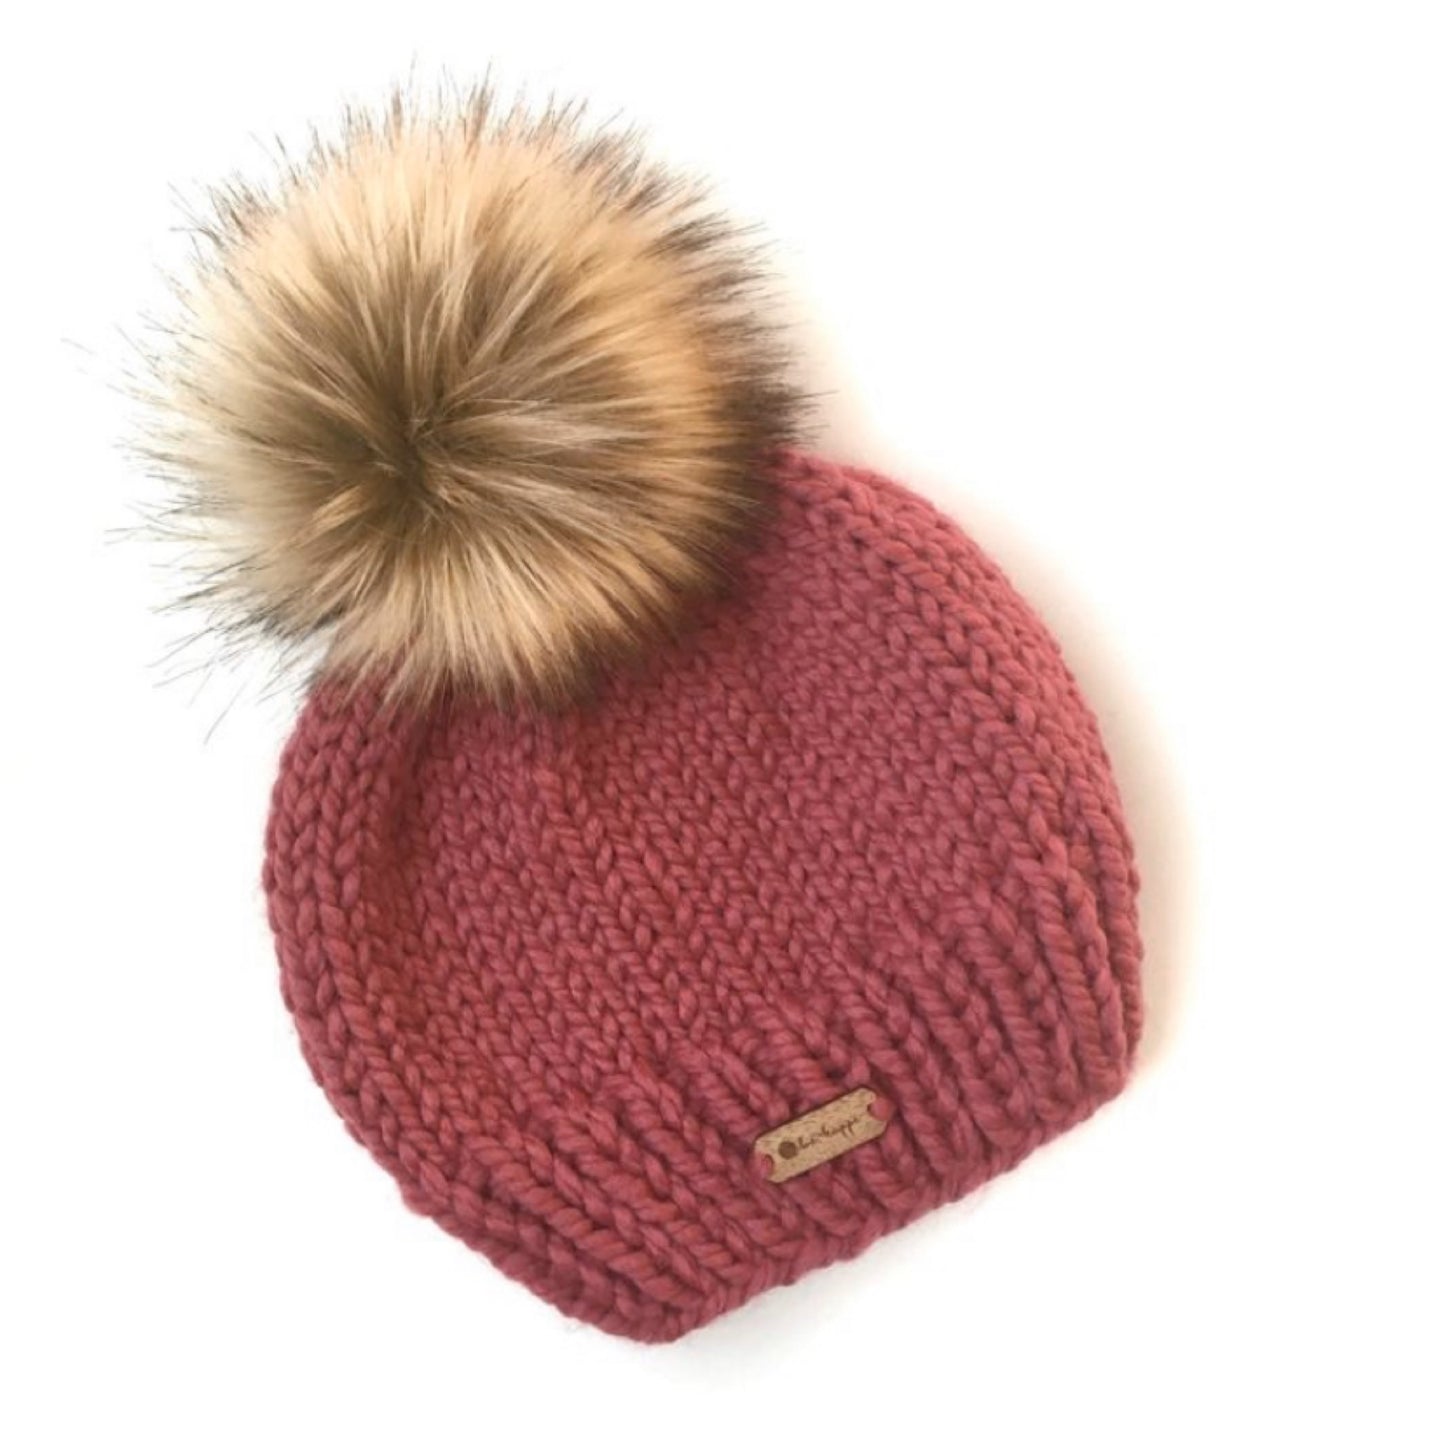 b.e.happe designs raspberry fitted pom hat